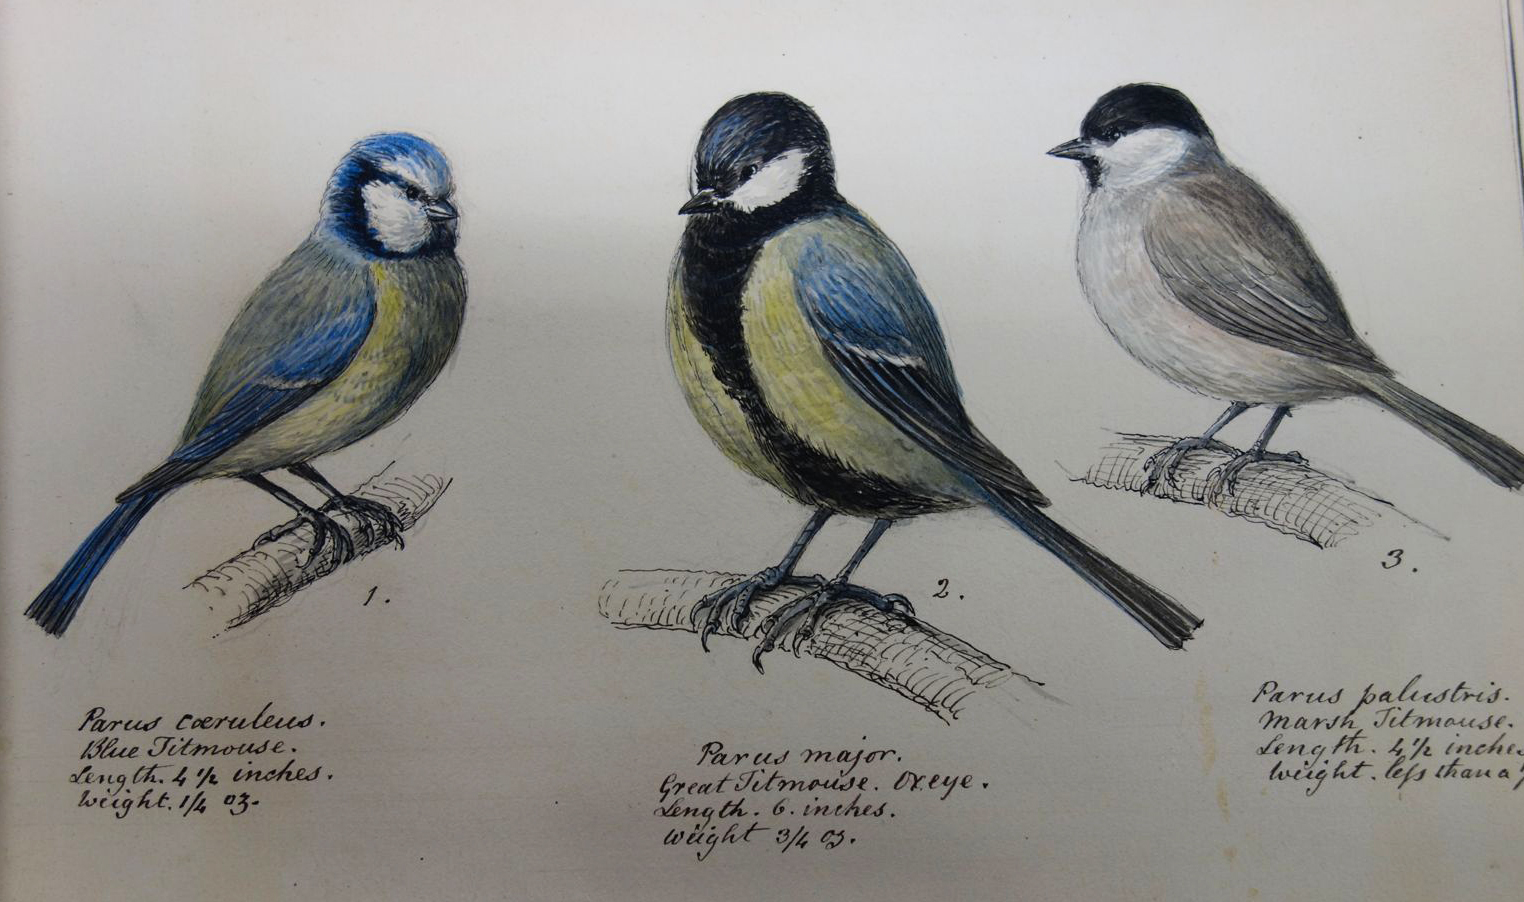 An illustration of three birds from one of John Weld's texts.